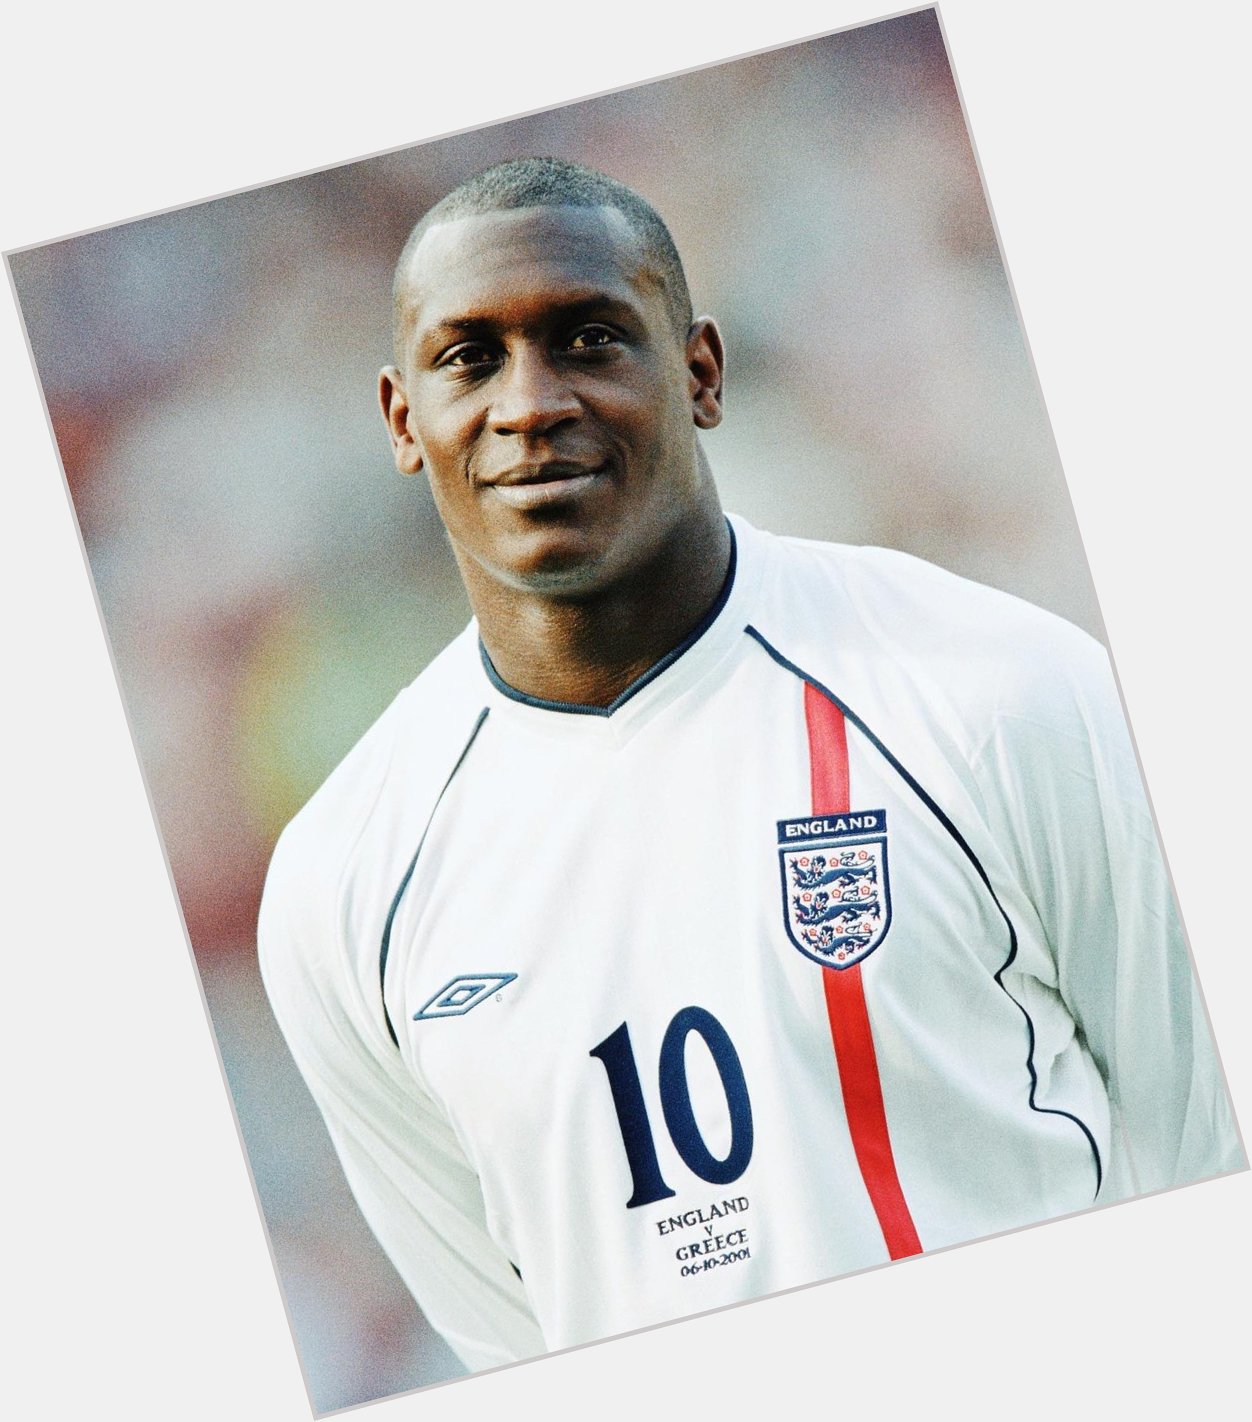 Happy birthday to Emile Heskey        Premier League Record: Appearances 516 Goals 110 Assists 53 